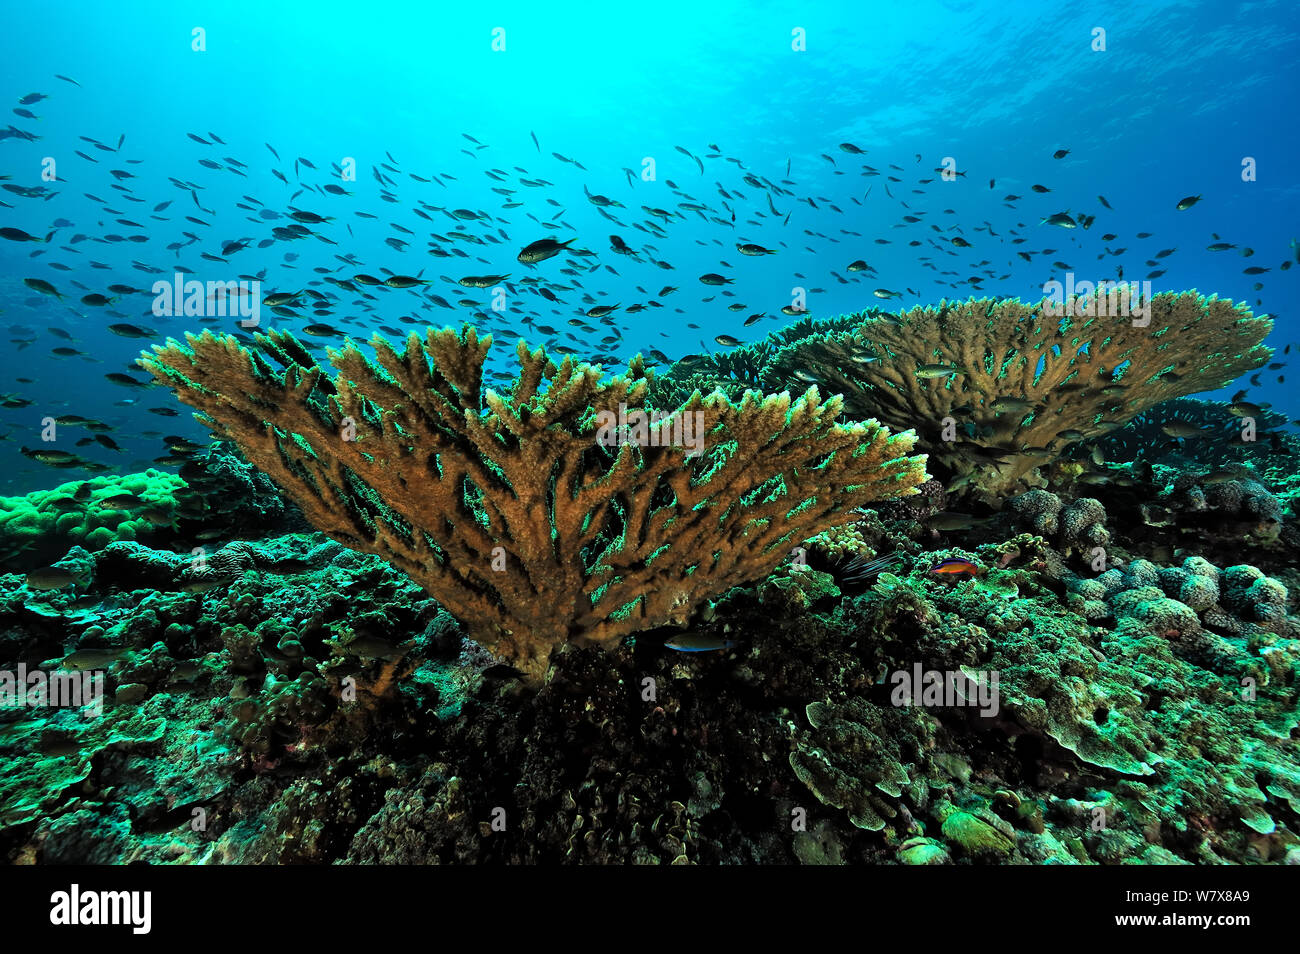 Coral reef with ternate pullers / chromis (Chromis ternatensis) above hard corals tables (Acropora ), Daymaniyat islands, Oman. Gulf of Oman. Stock Photo